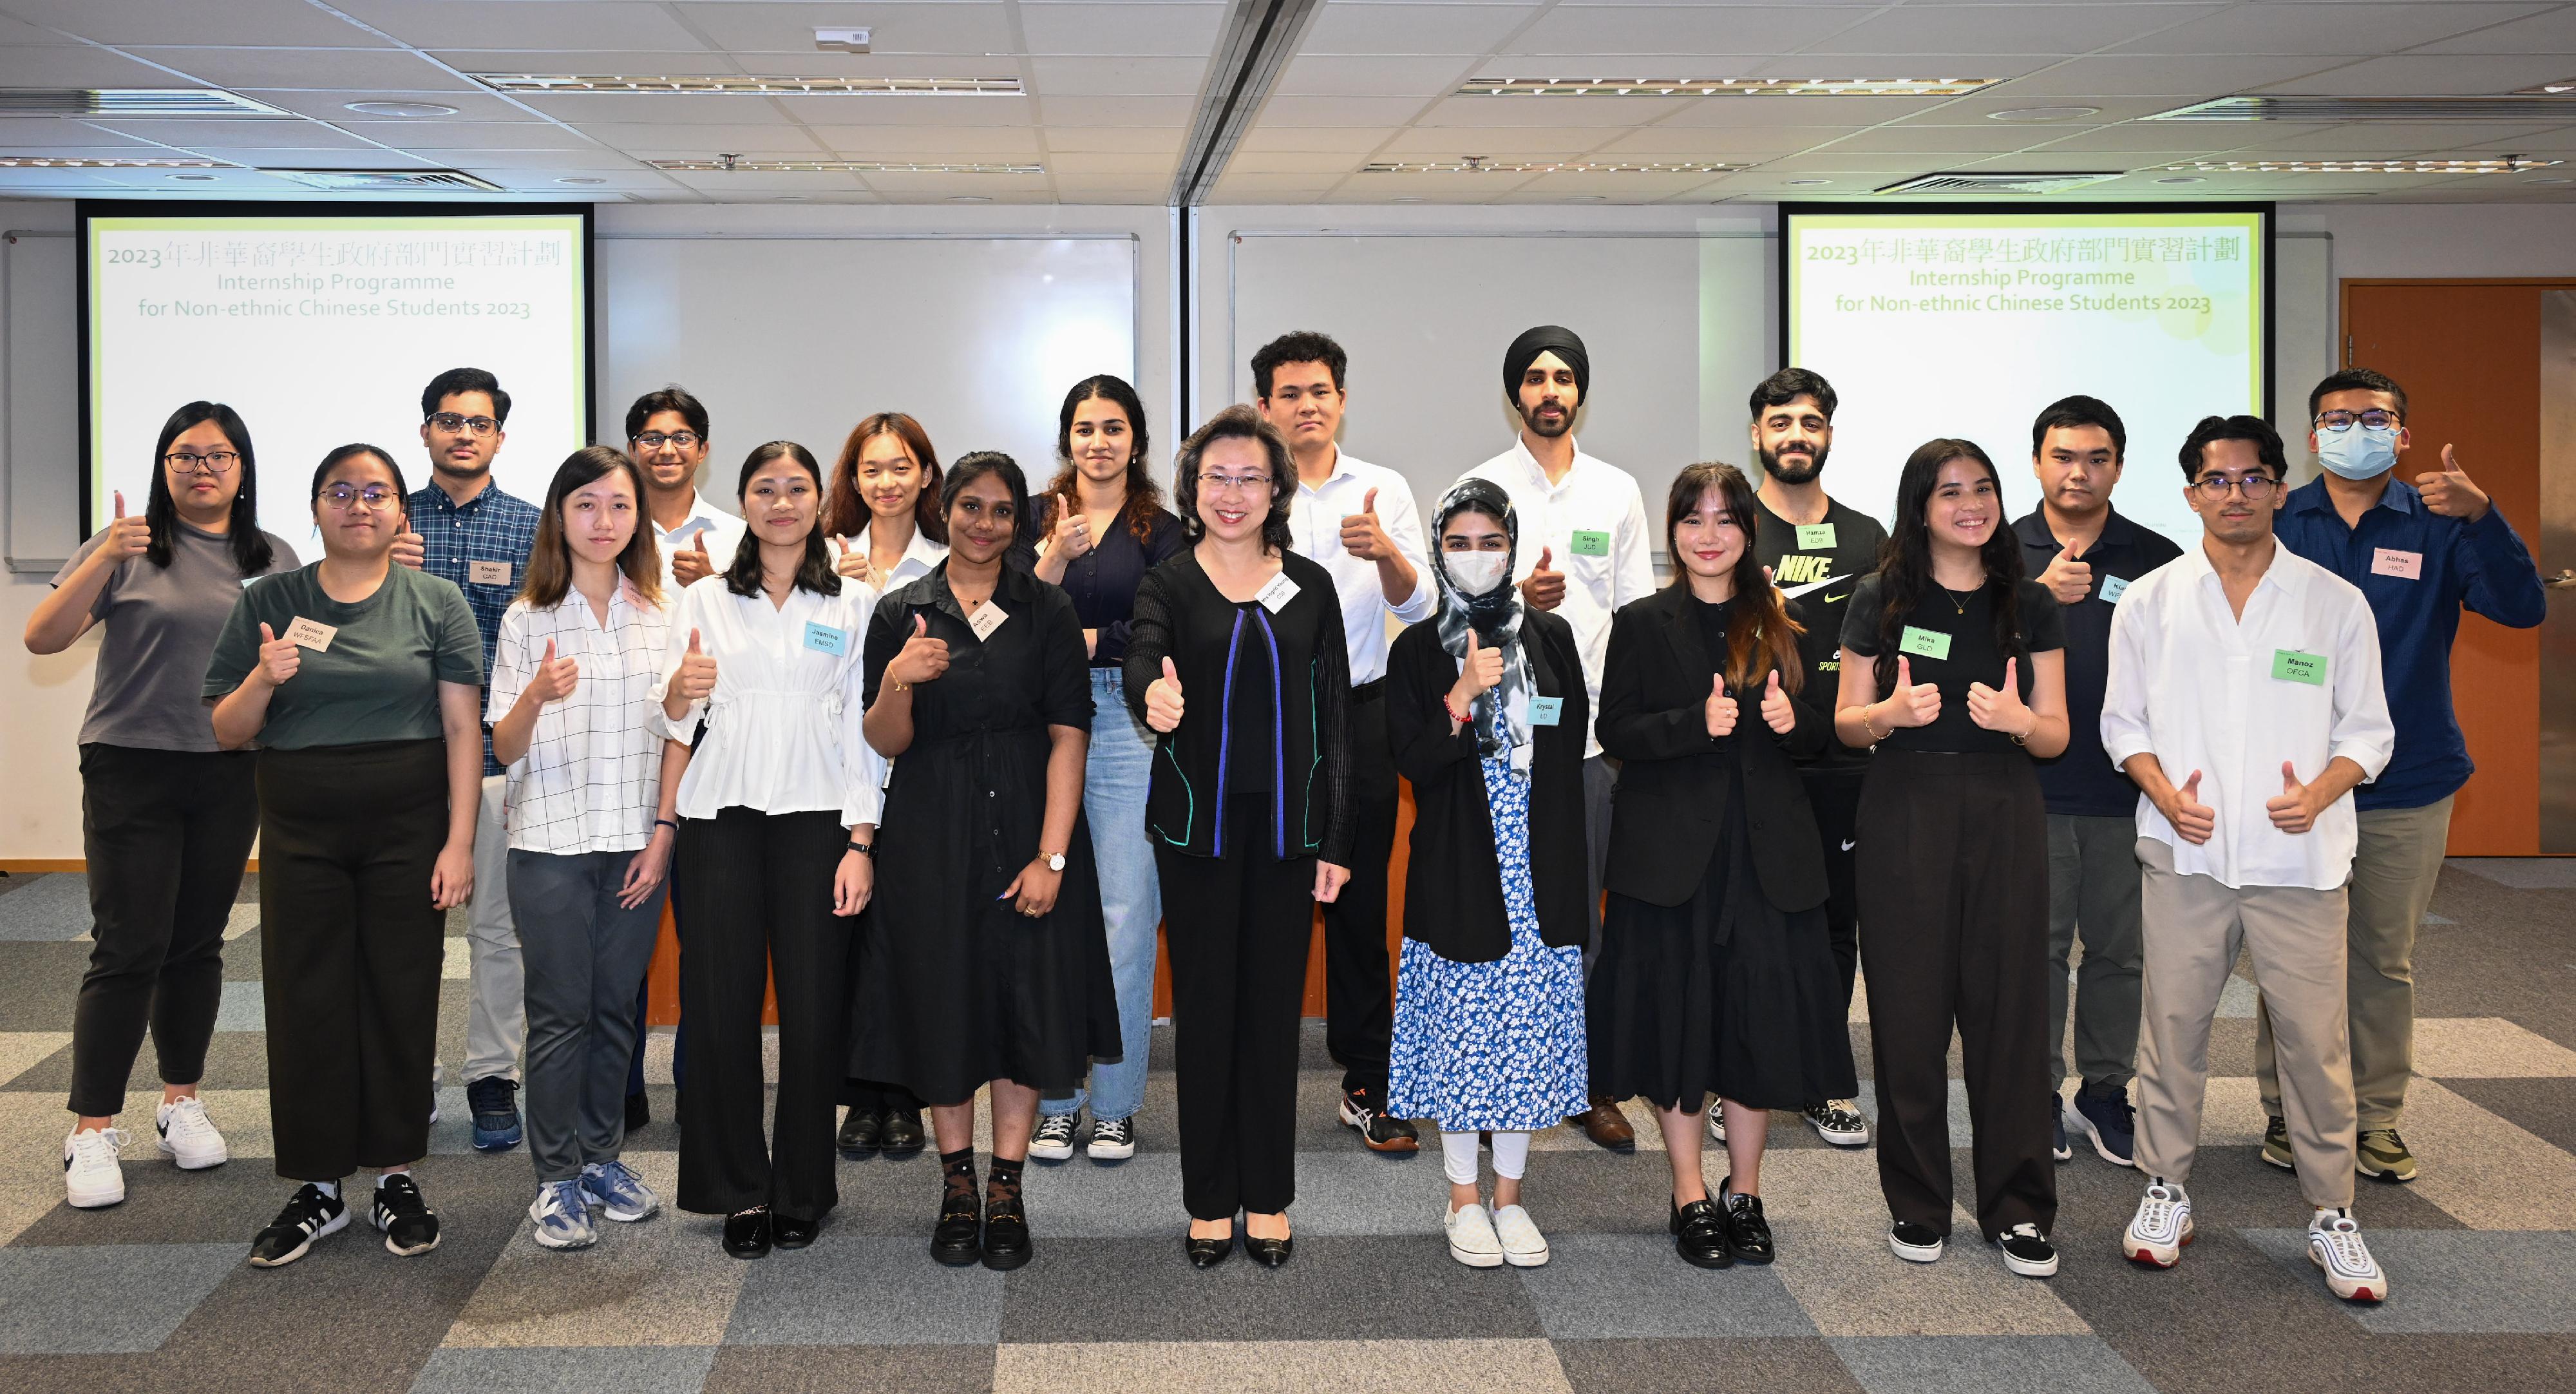 The Secretary for the Civil Service, Mrs Ingrid Yeung, today (August 17) attended a sharing session on the 2023 Internship Programme for Non-ethnic Chinese Students to learn about their internship experiences and takeaways. Photo shows Mrs Yeung (front row, centre) with the interns.